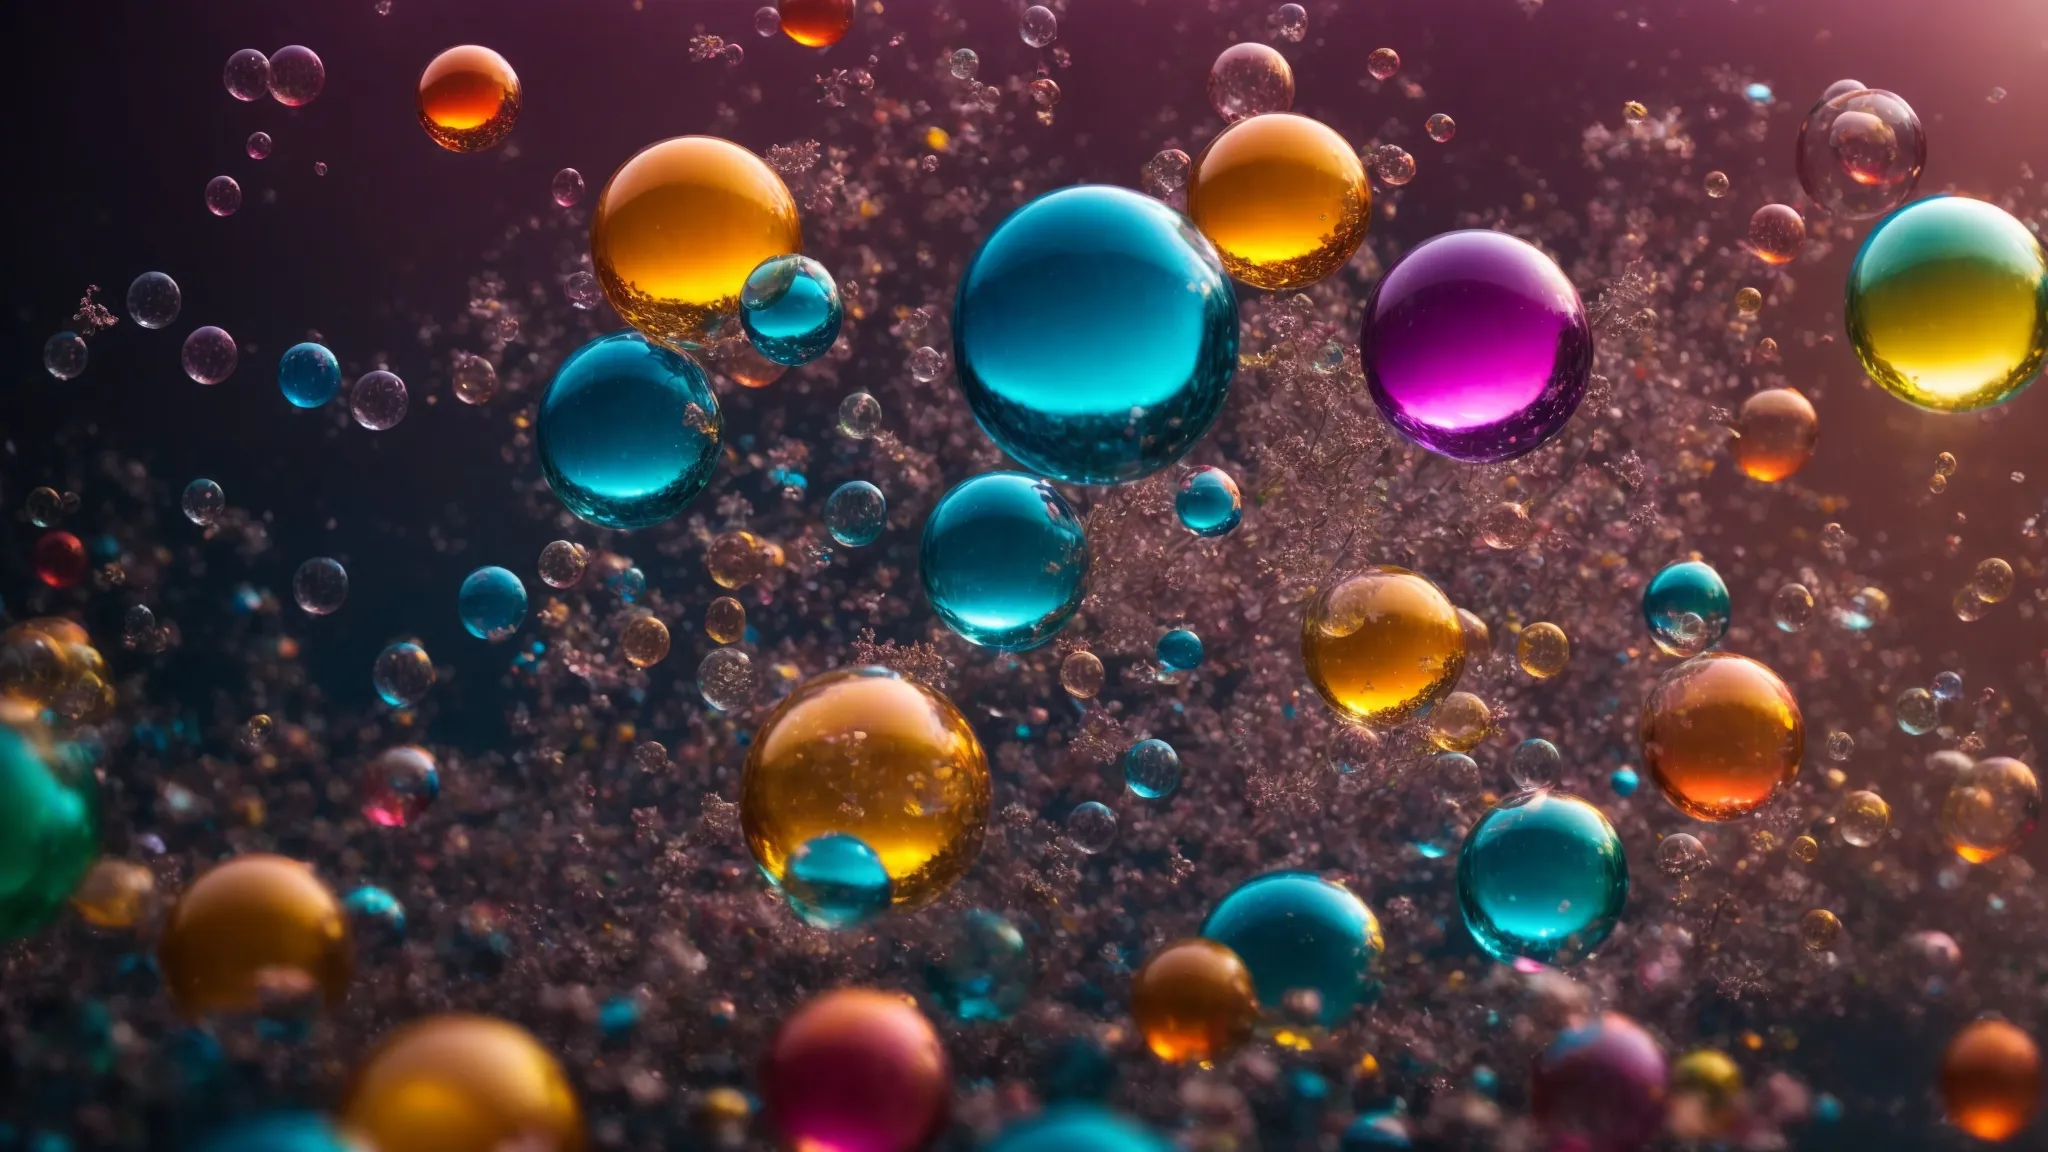 a cluster of diverse, colorful floating bubbles, each with different keywords visible inside them against a backdrop of faintly visible search engine result pages.